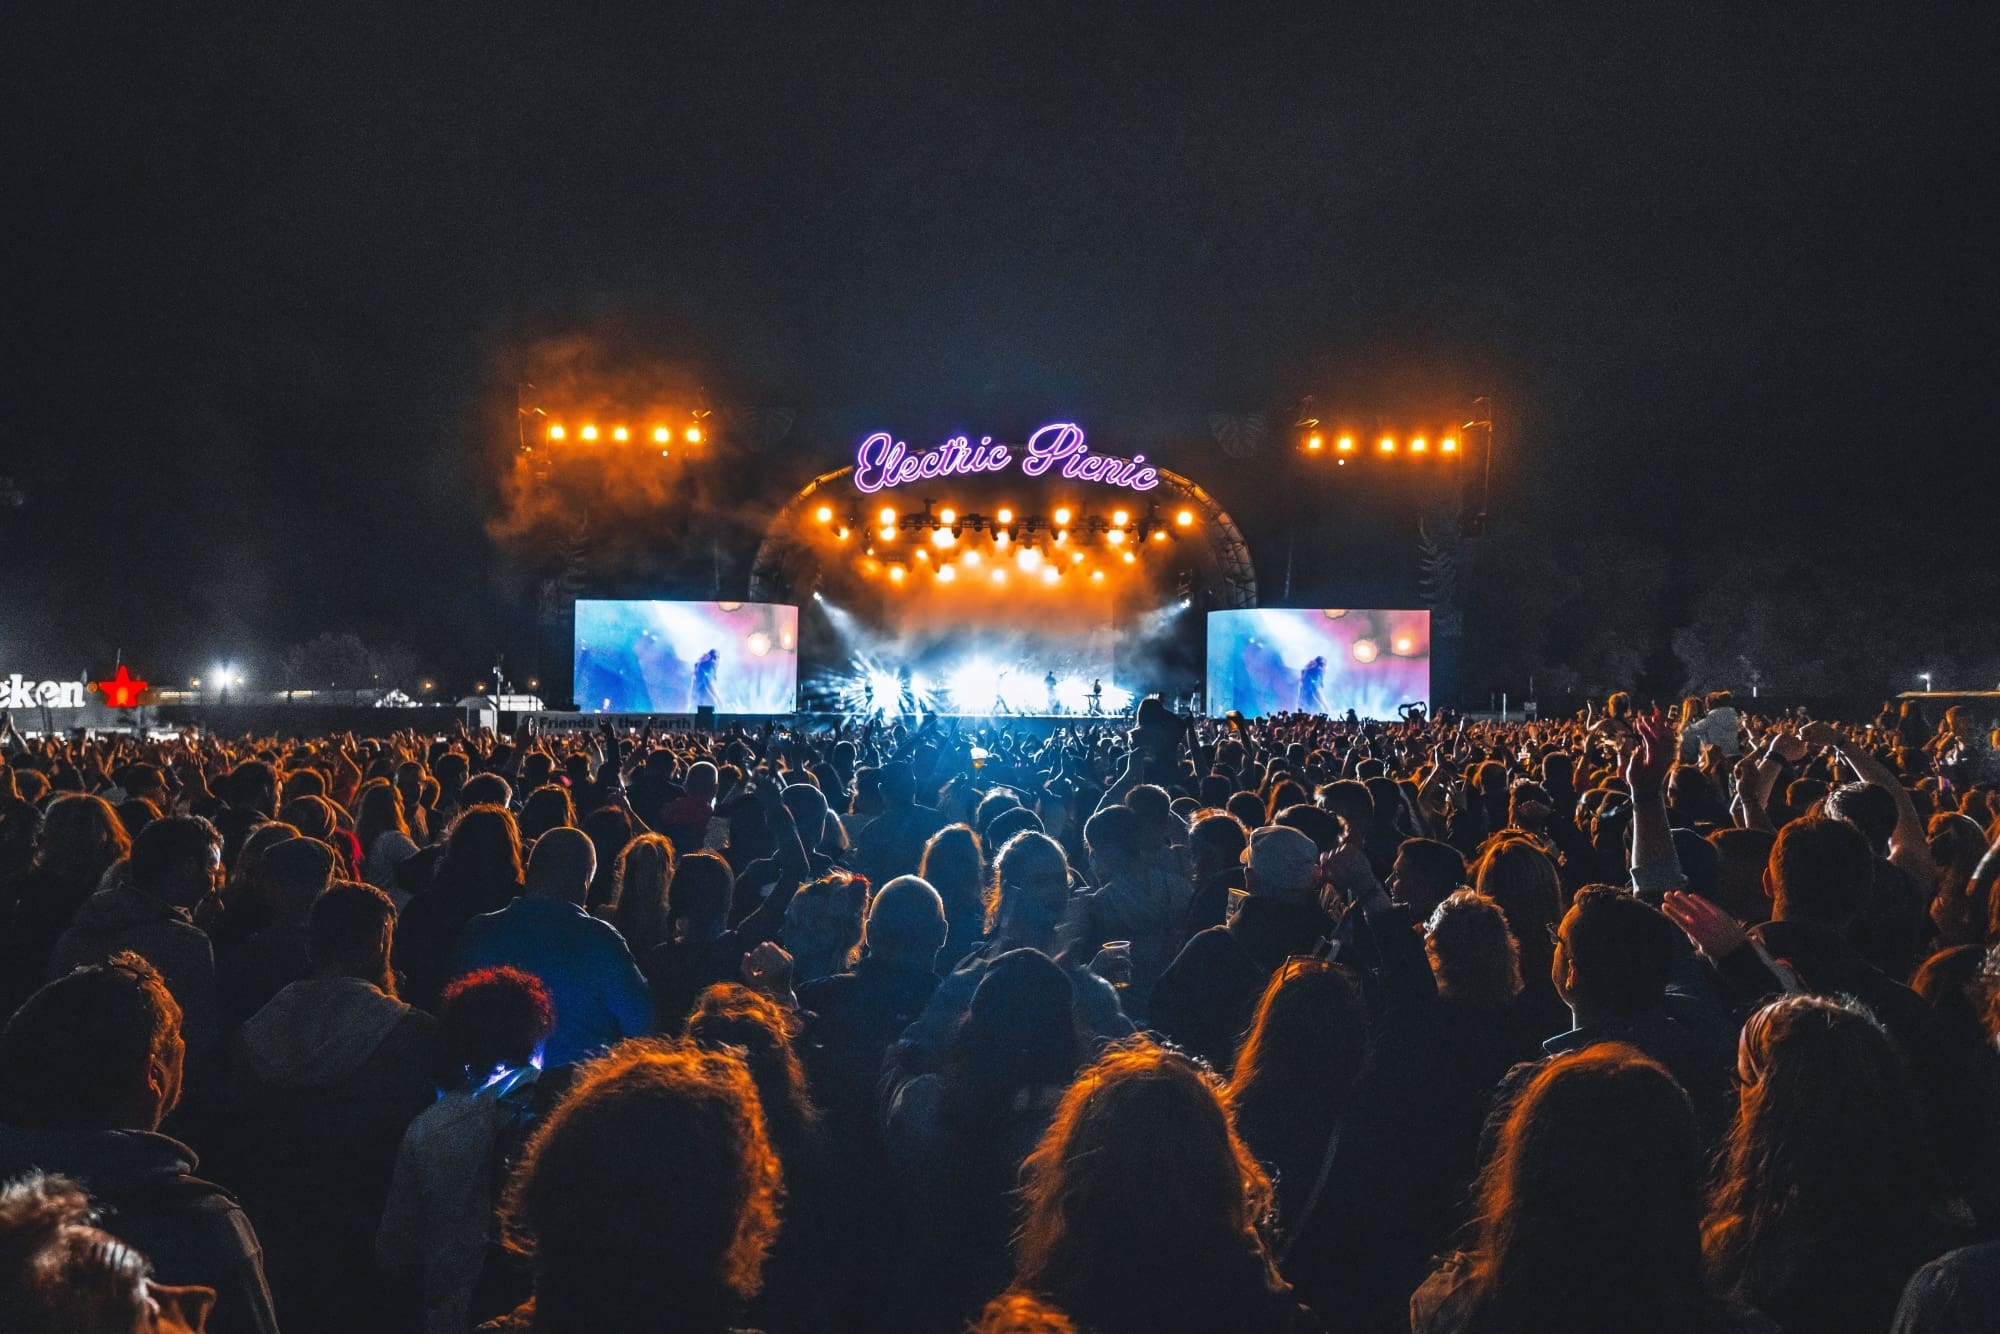 Photograph of a crowd at the Electric Picnic Main Stage.